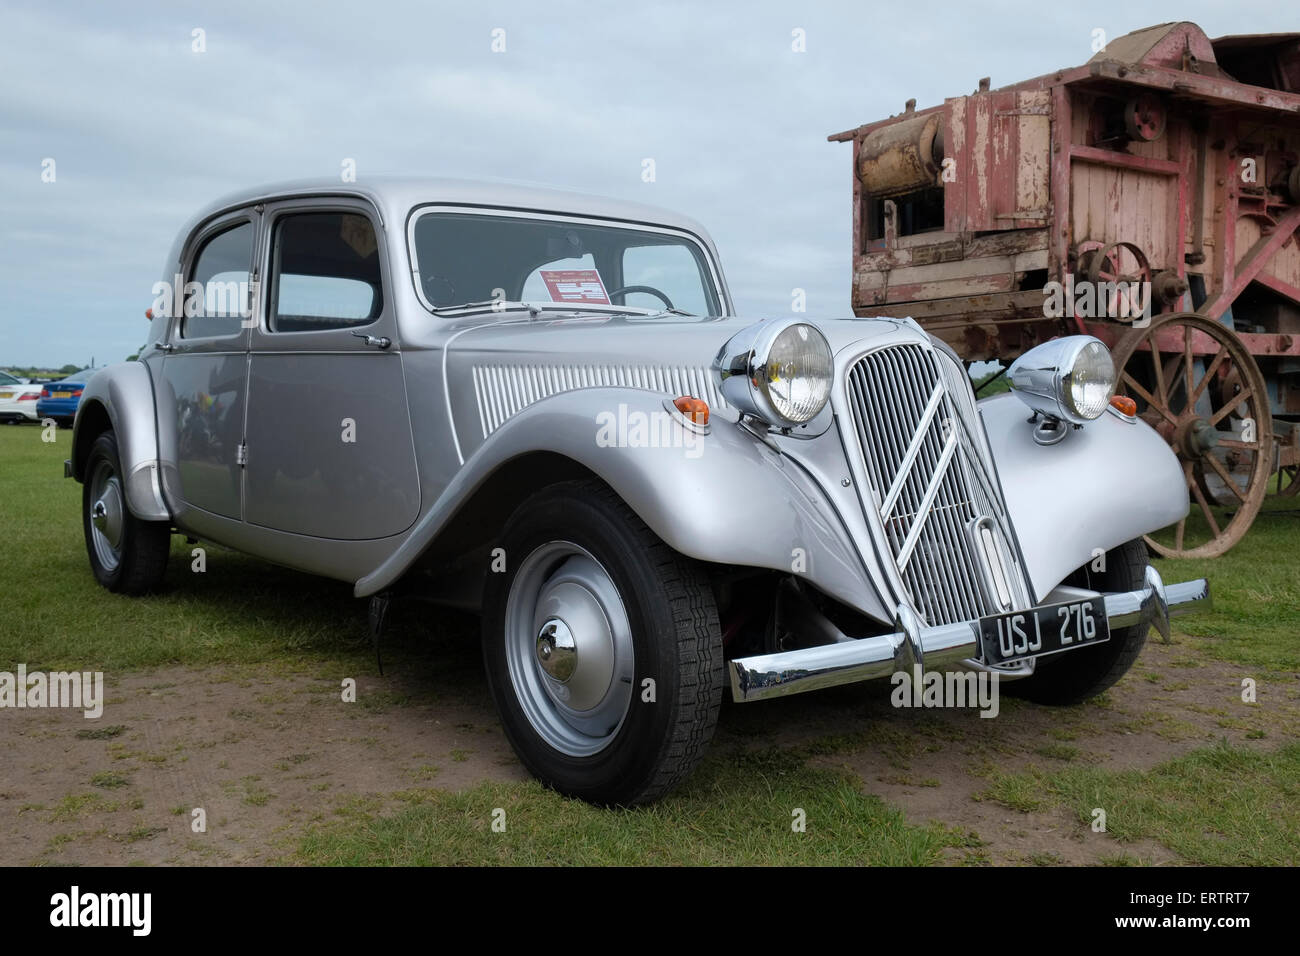 A 1956 Citroën Traction Avant 1911cc car on display at Old Warden airfield, Bedfordshire, England. Stock Photo